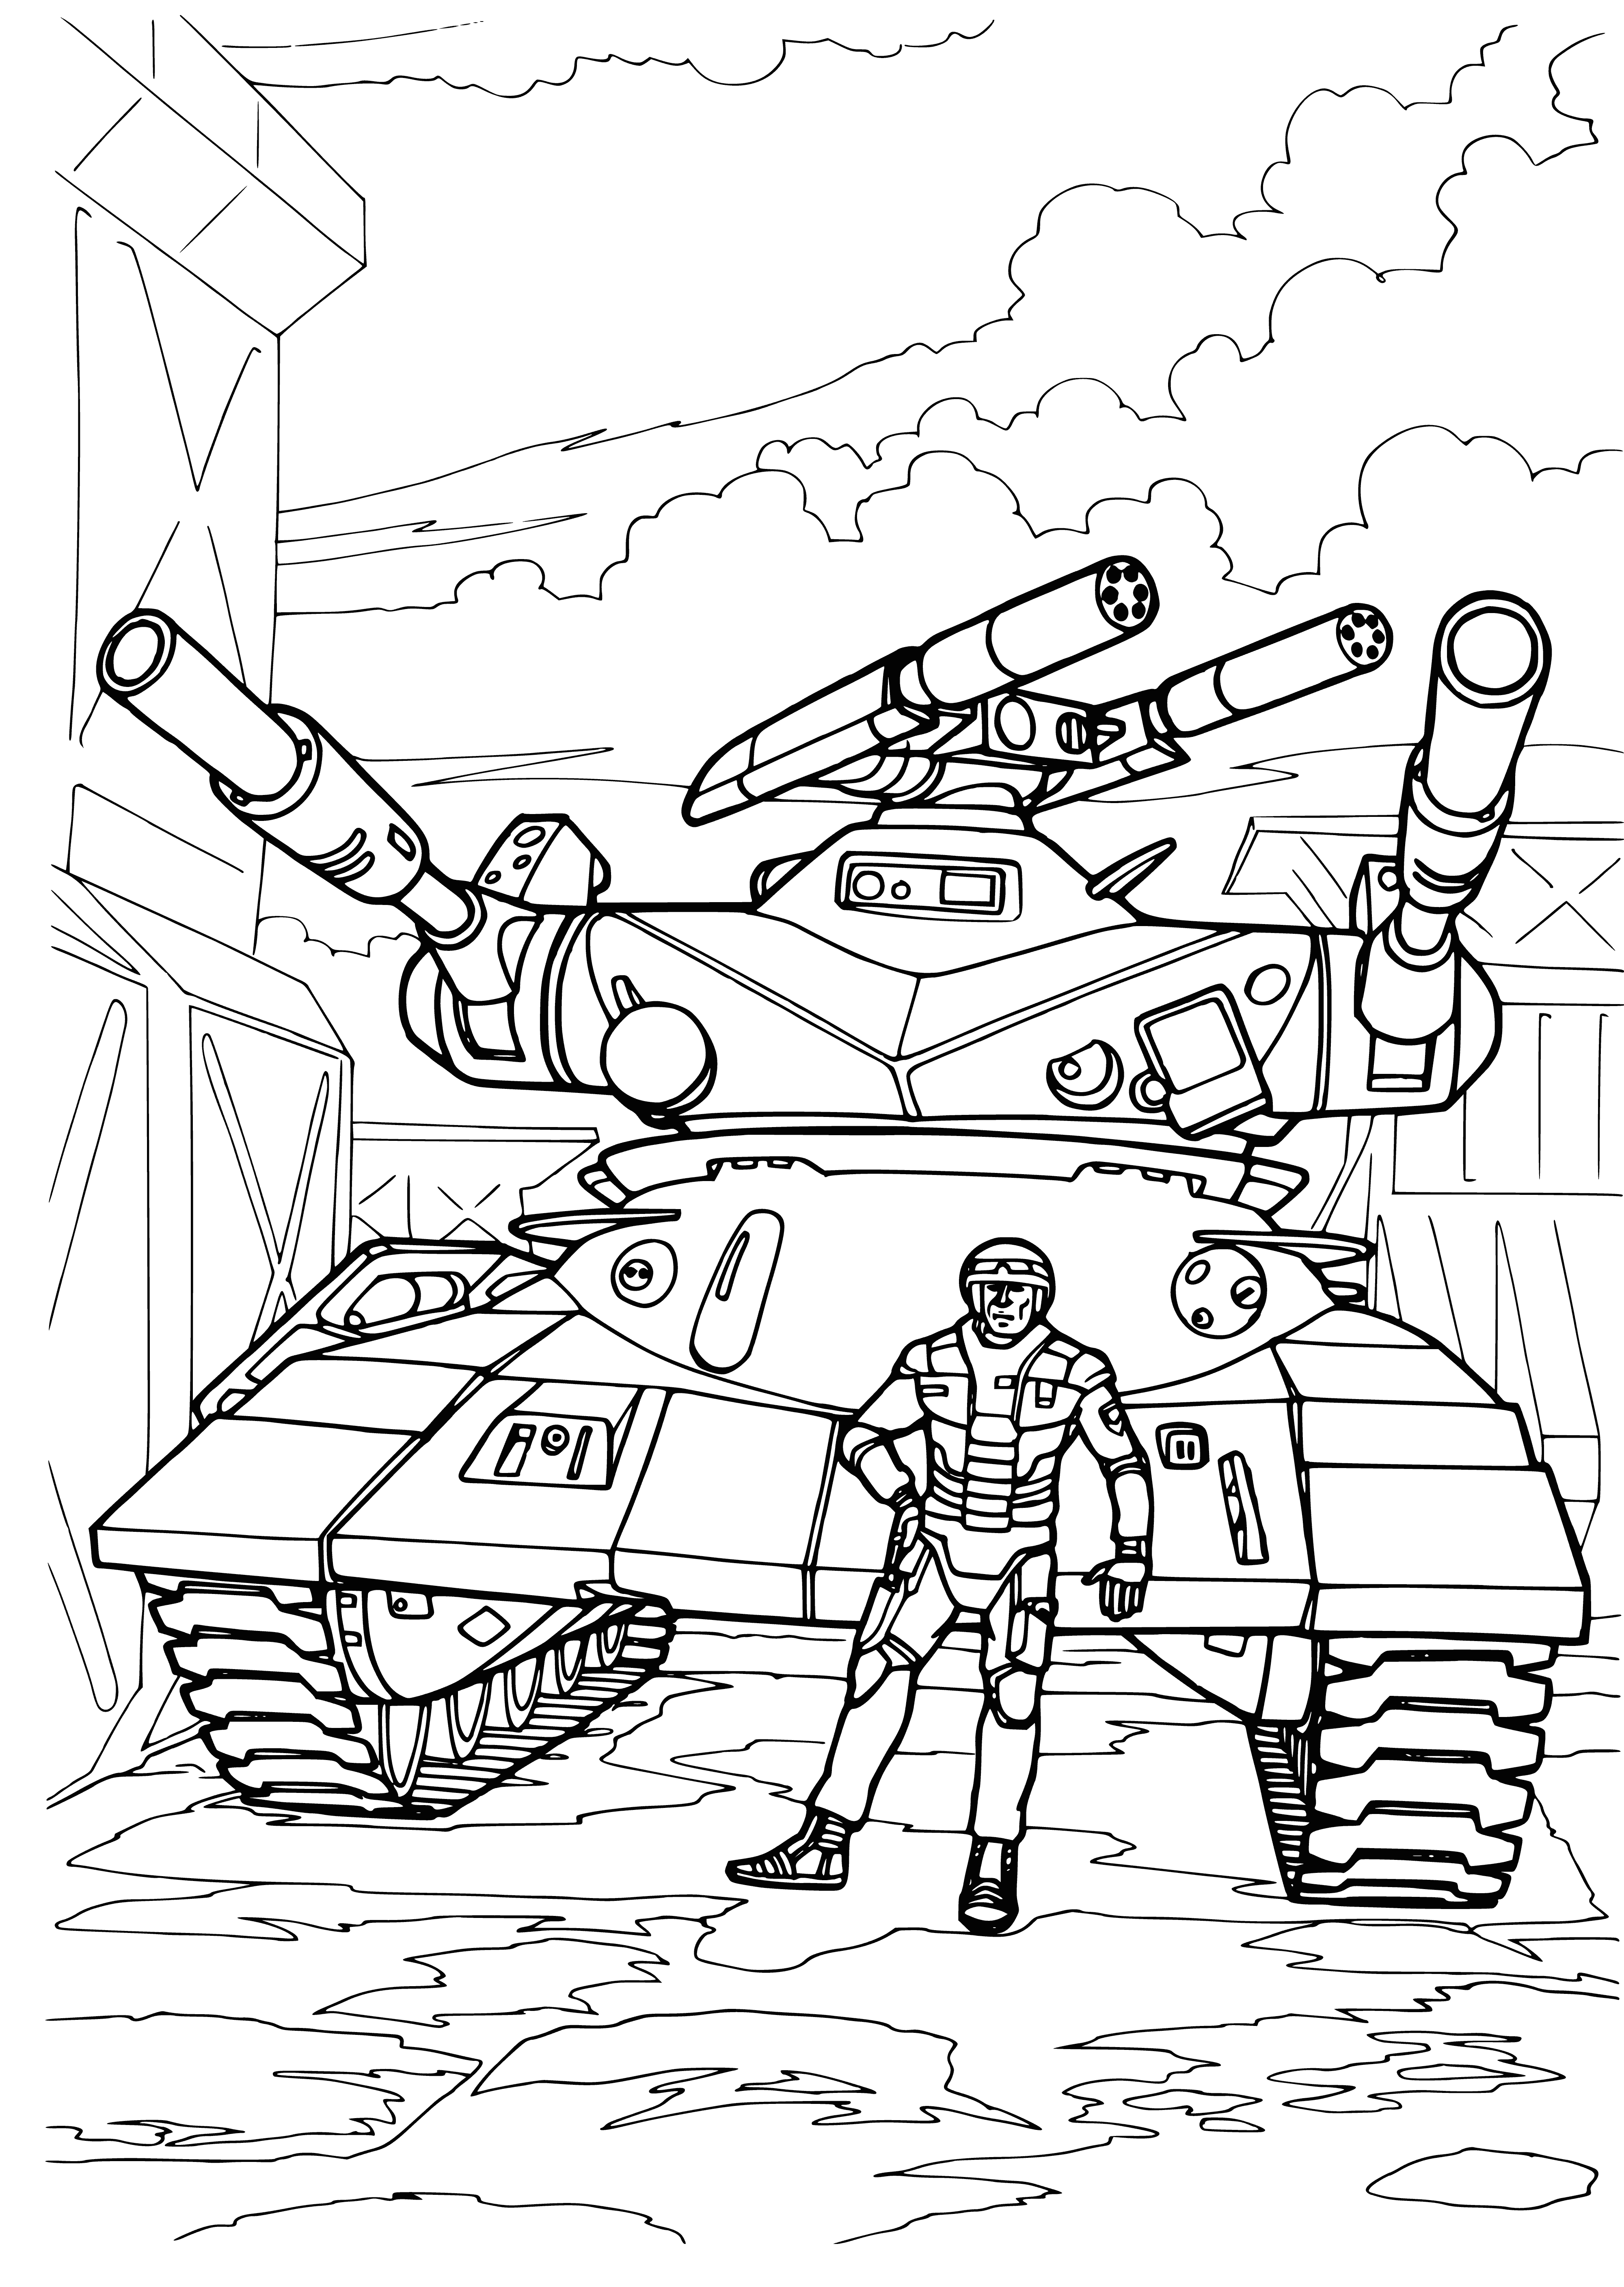 Super tank coloring page